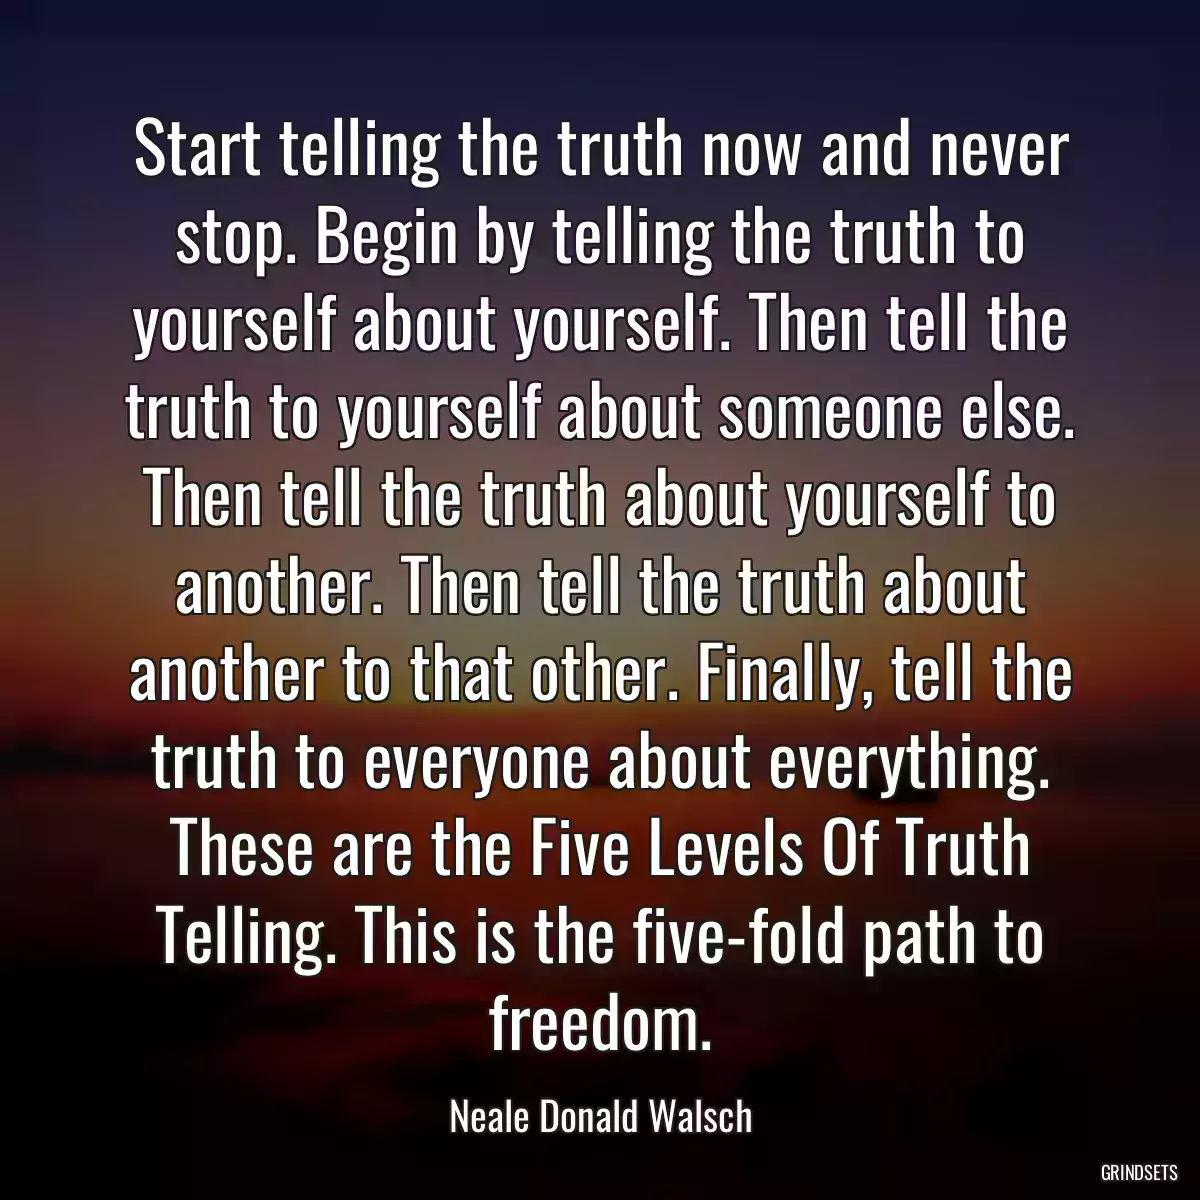 Start telling the truth now and never stop. Begin by telling the truth to yourself about yourself. Then tell the truth to yourself about someone else. Then tell the truth about yourself to another. Then tell the truth about another to that other. Finally, tell the truth to everyone about everything. These are the Five Levels Of Truth Telling. This is the five-fold path to freedom.